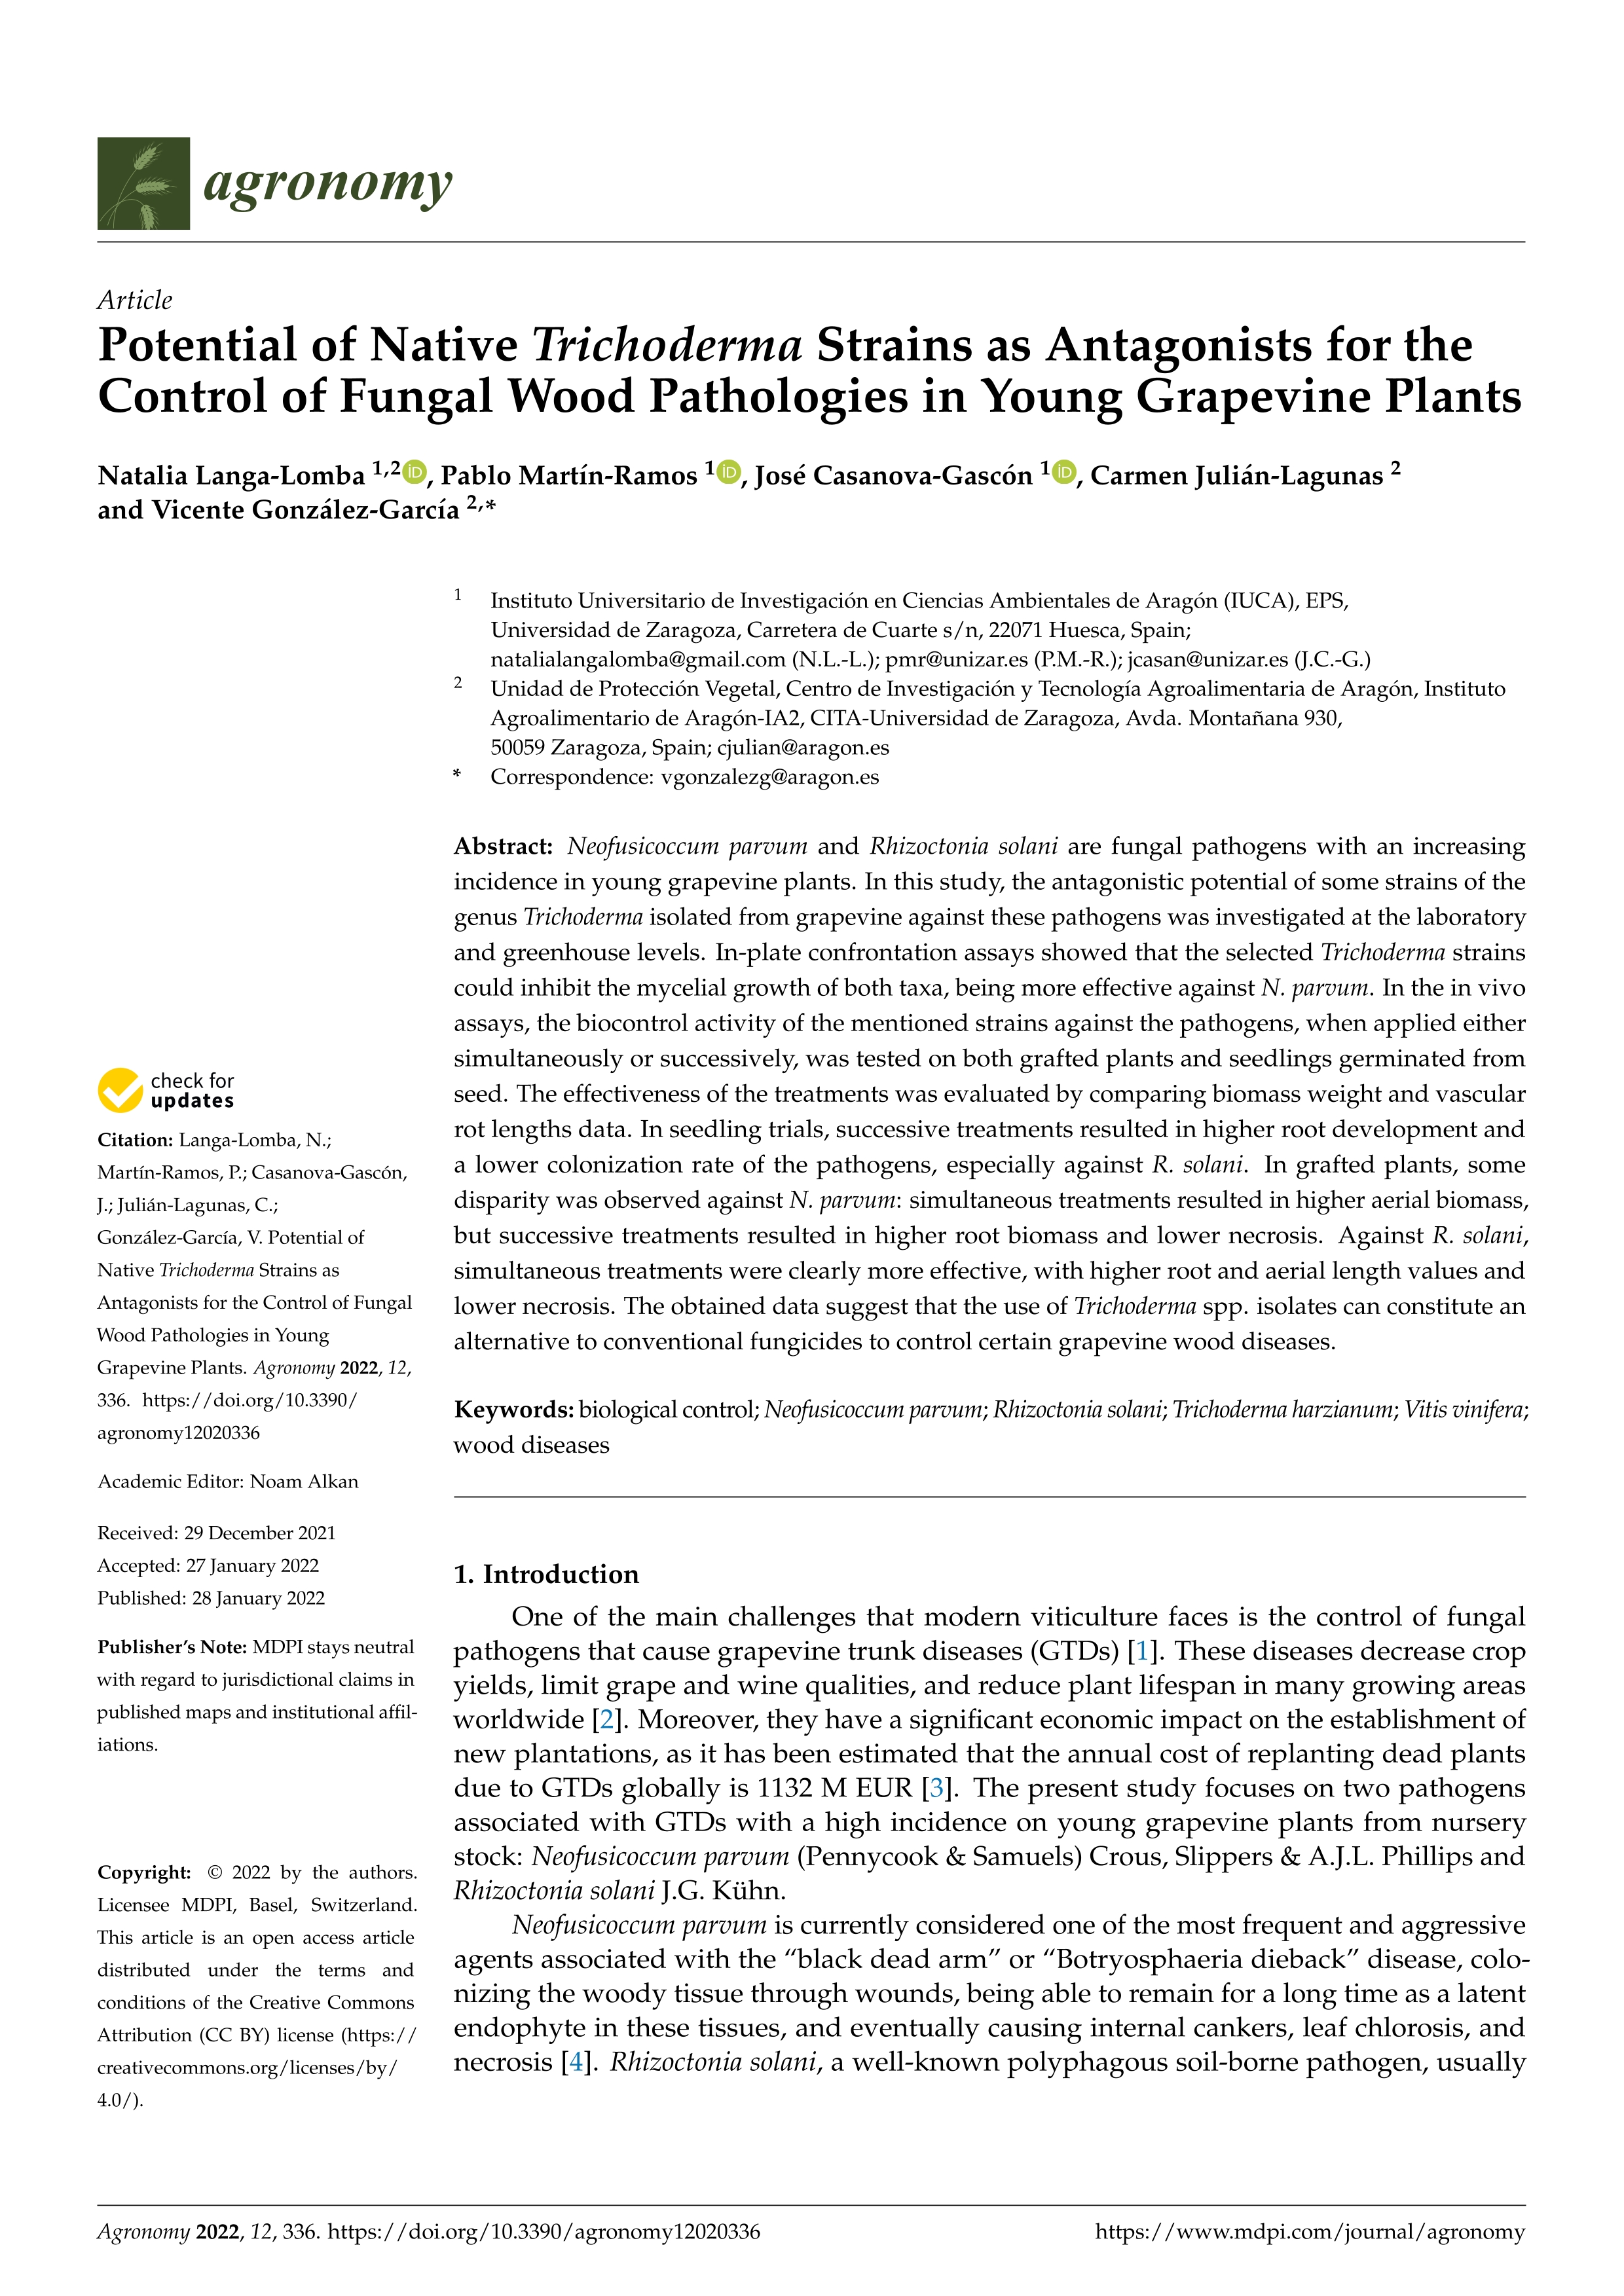 Potential of native Trichoderma strains as antagonists for the control of fungal wood pathologies in young grapevine plants